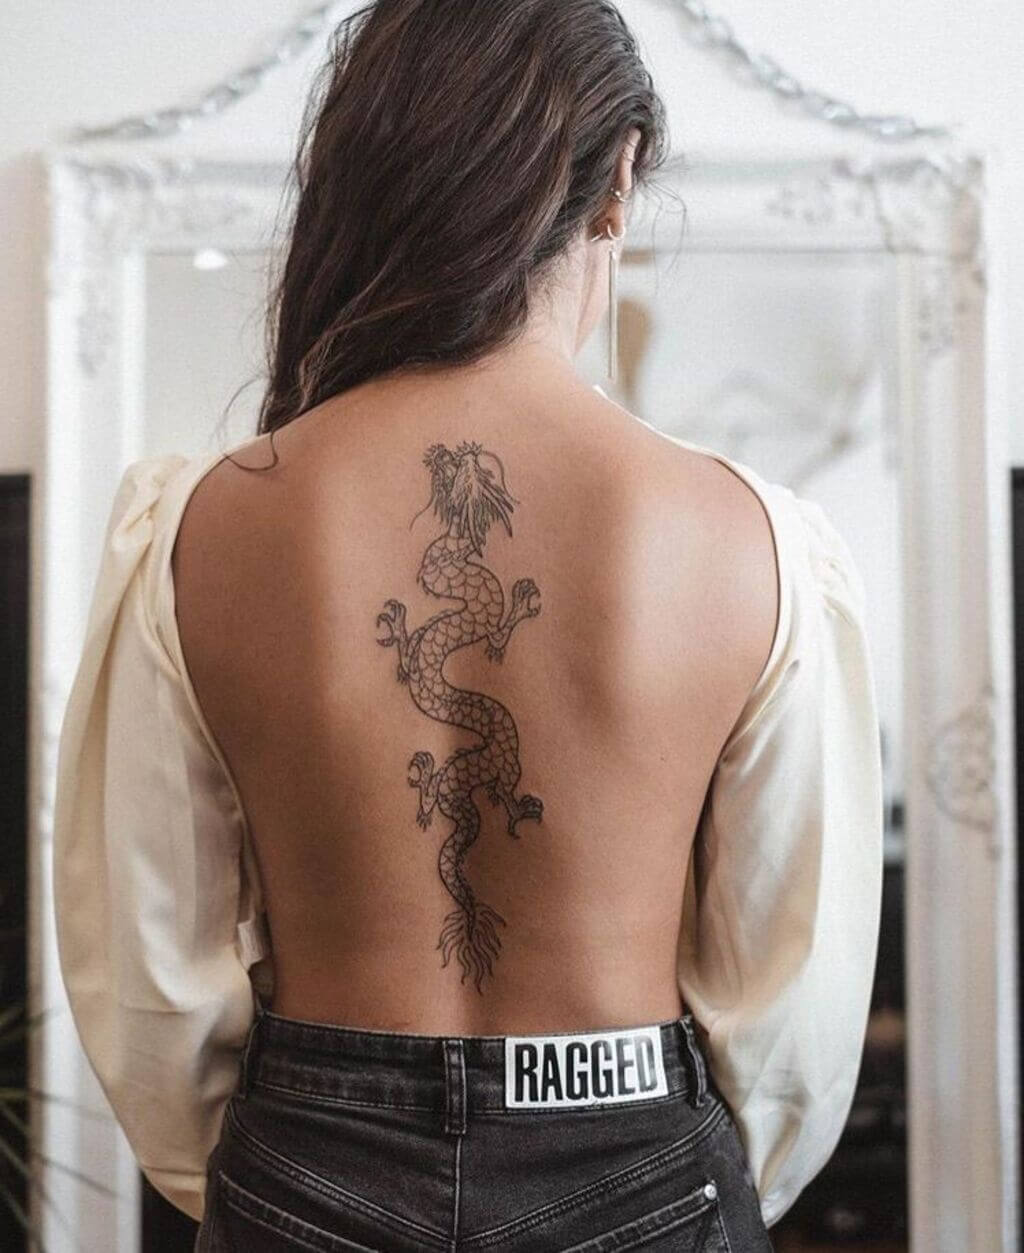 40 Feminine Back Tattoos to Inspire Your Next Ink  Everything Abode